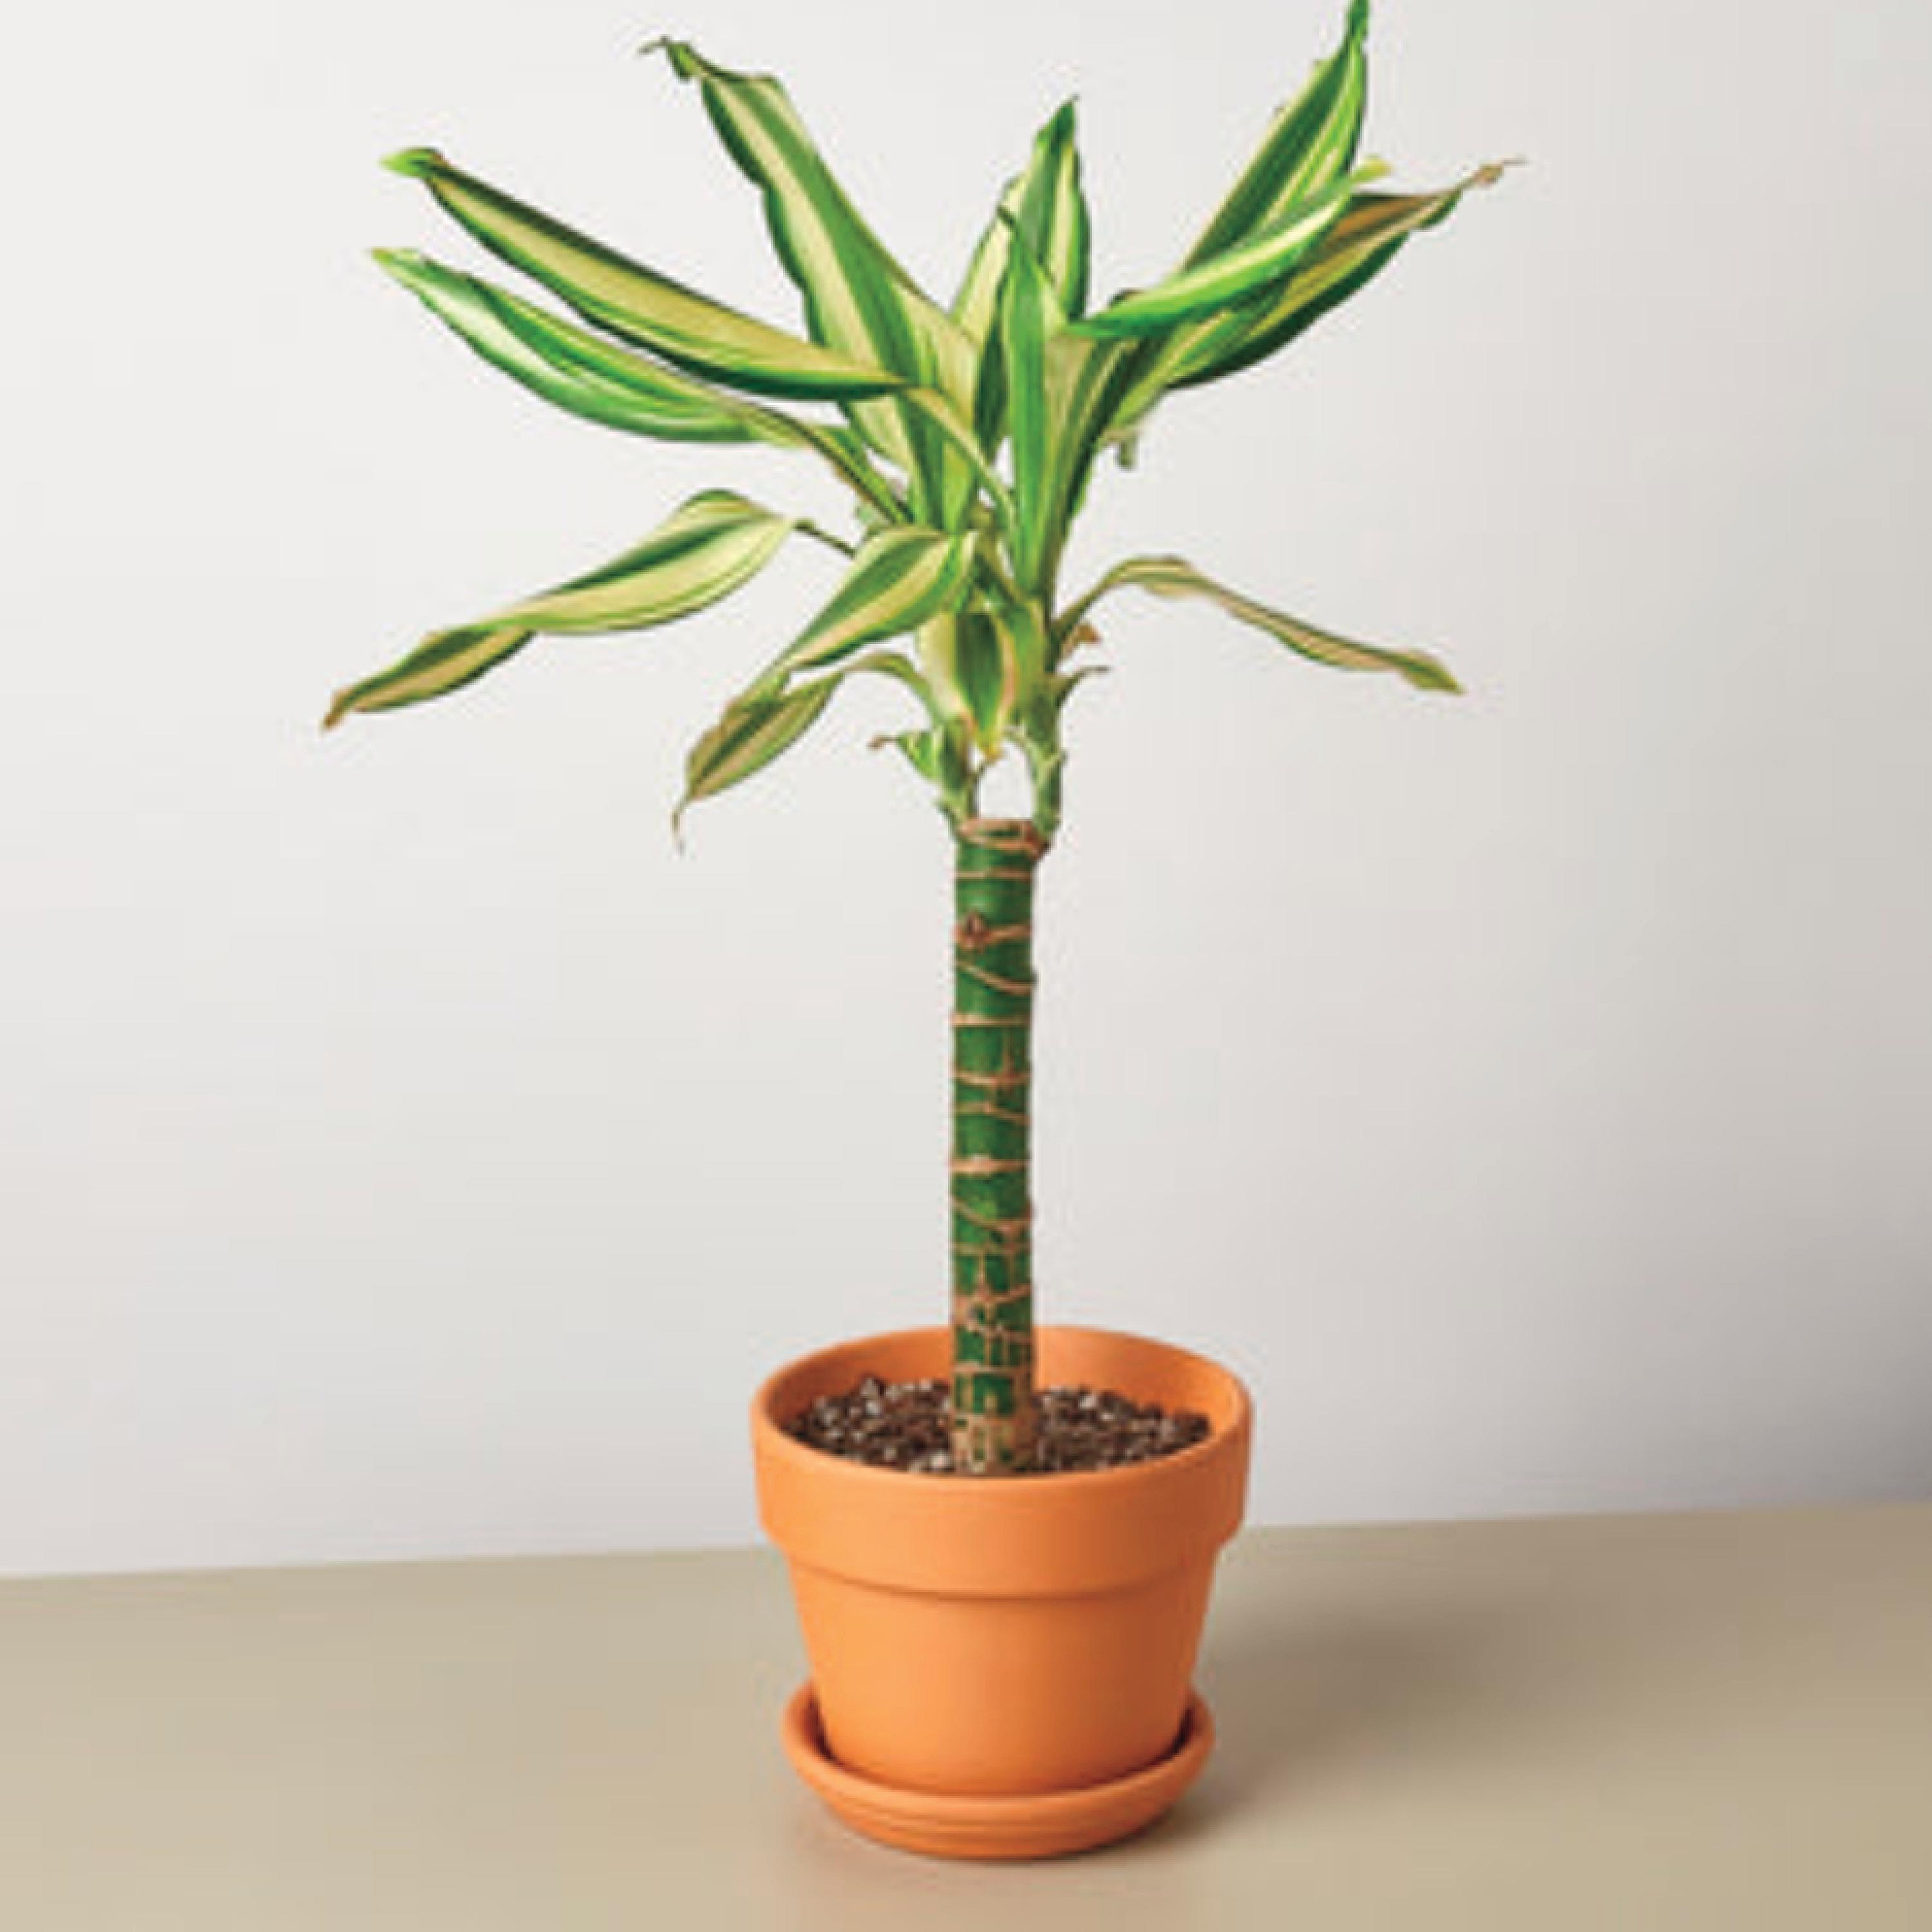 Potted Dracaena Sted Sol Cane, 4" Pot